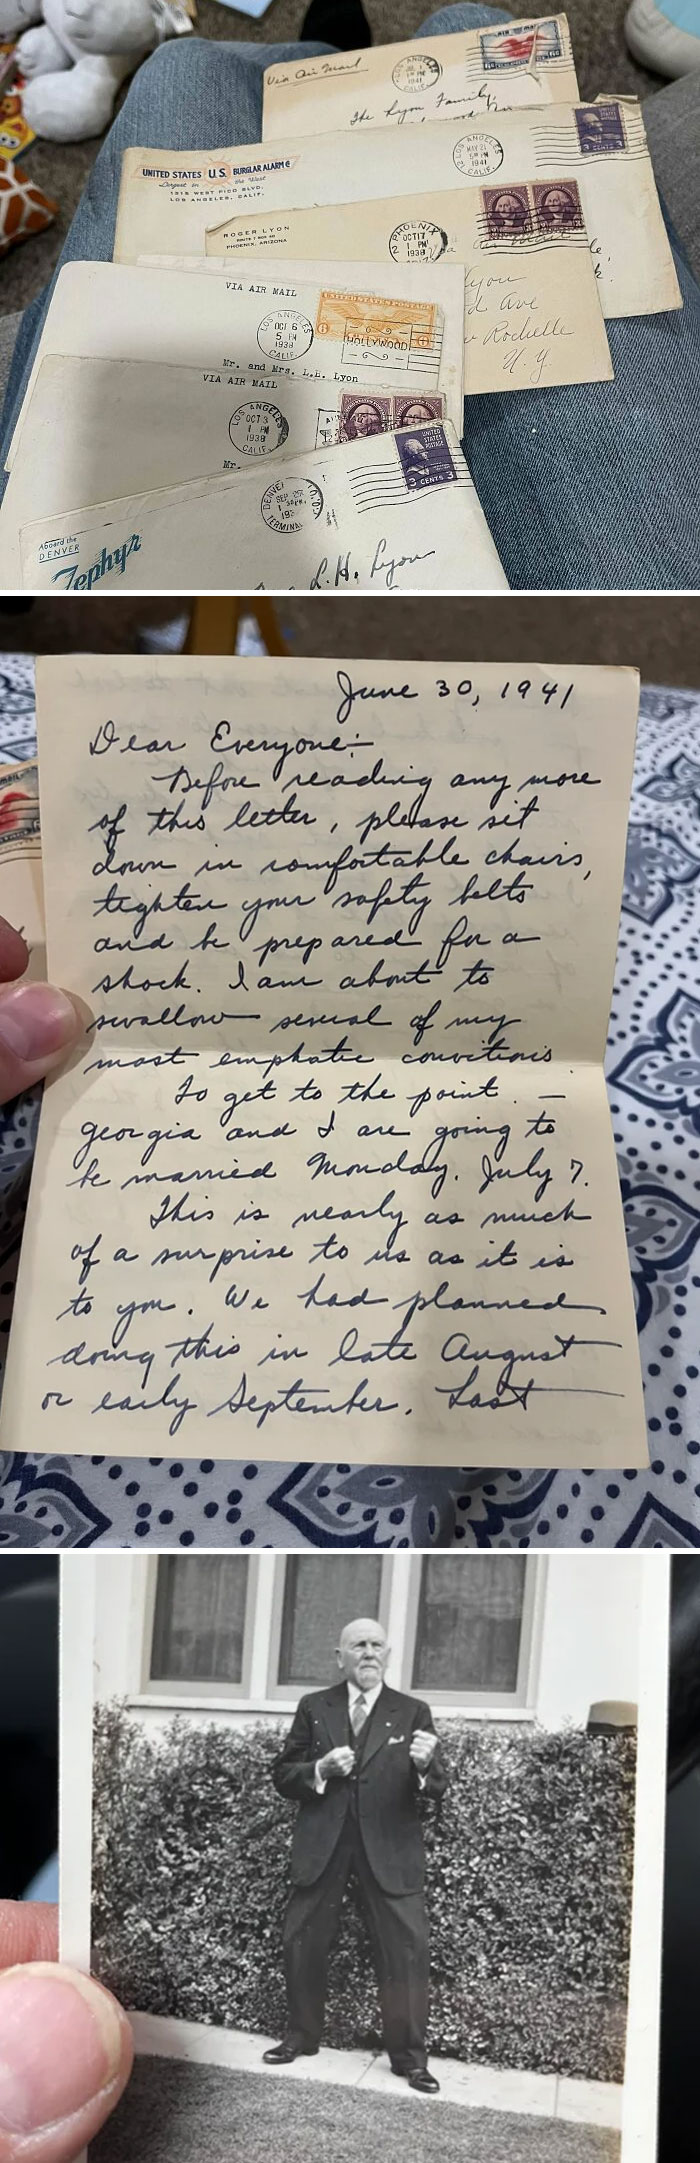 Found These Letters From 1938 In The Construction Dumpster At A Senior Care Place I Was Working At Doing Remodel Work